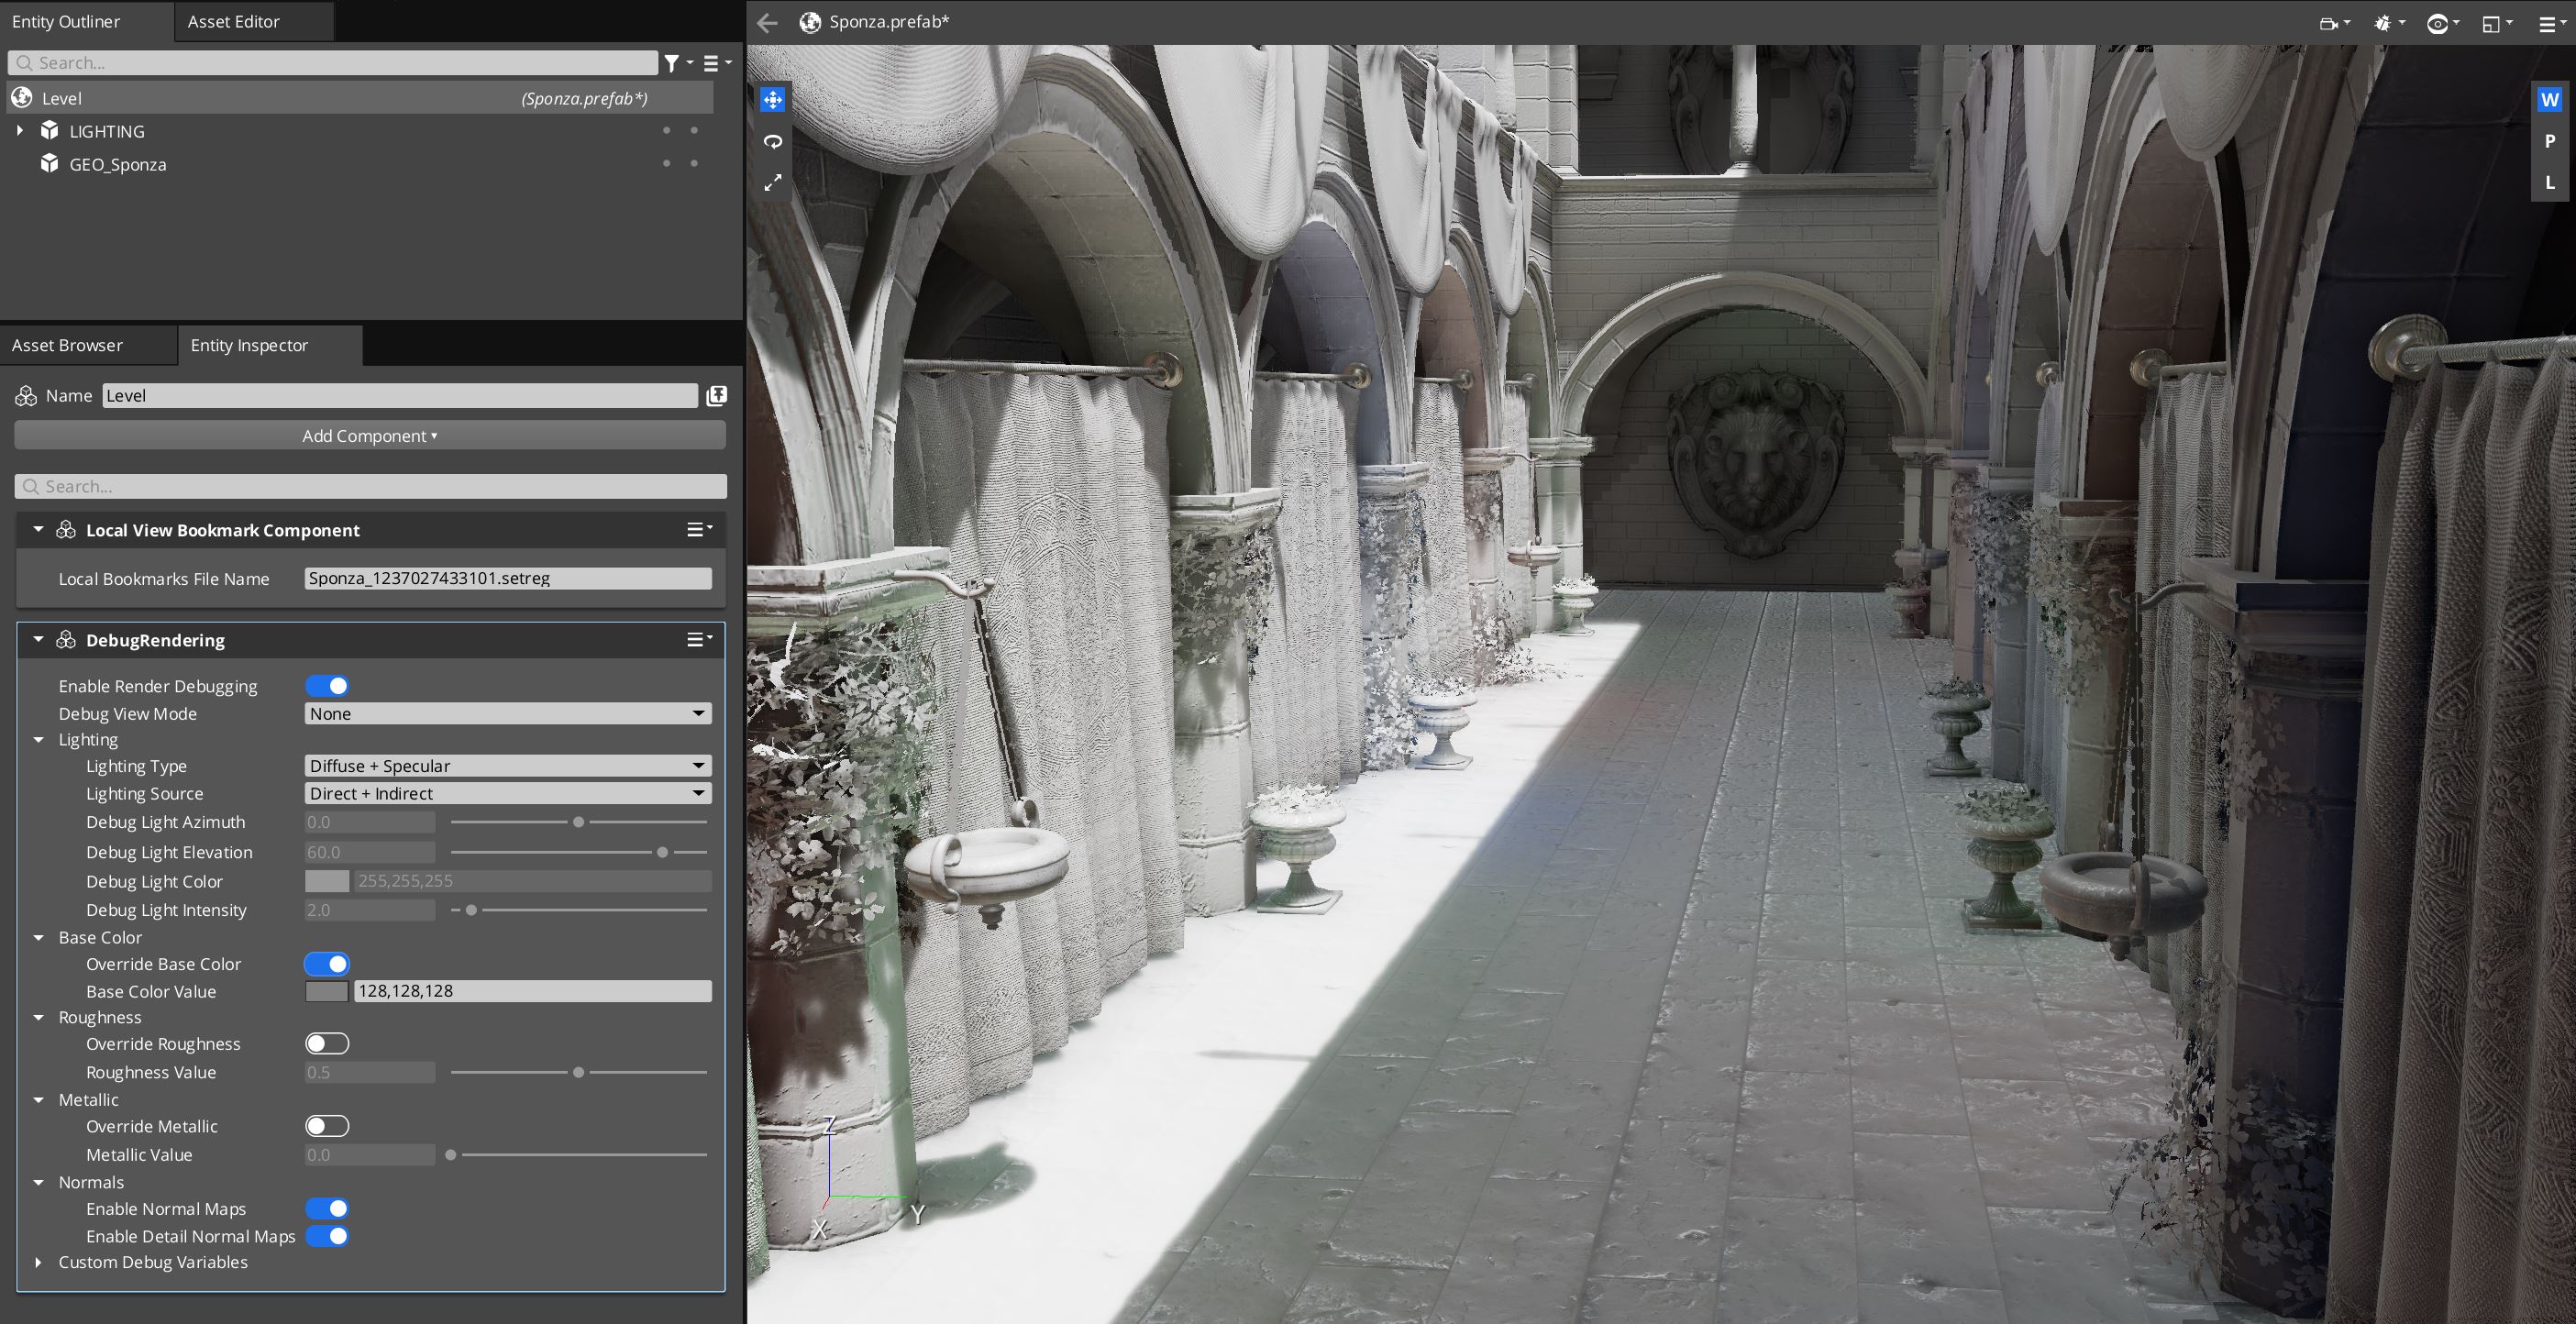 Screenshot overriding the base color in the scene to grey